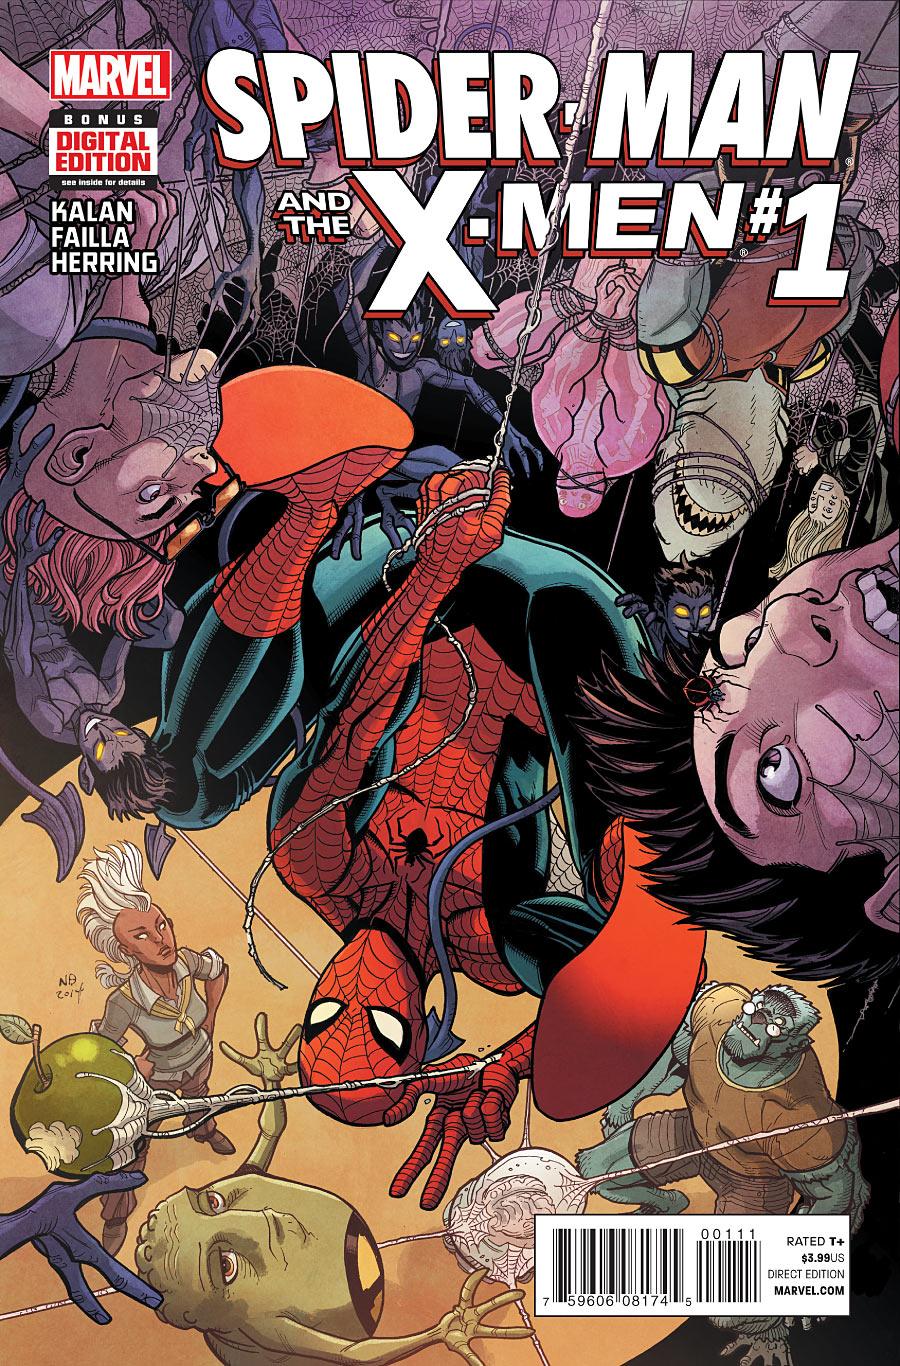 Spider-Man and the X-Men Vol. 1 #1